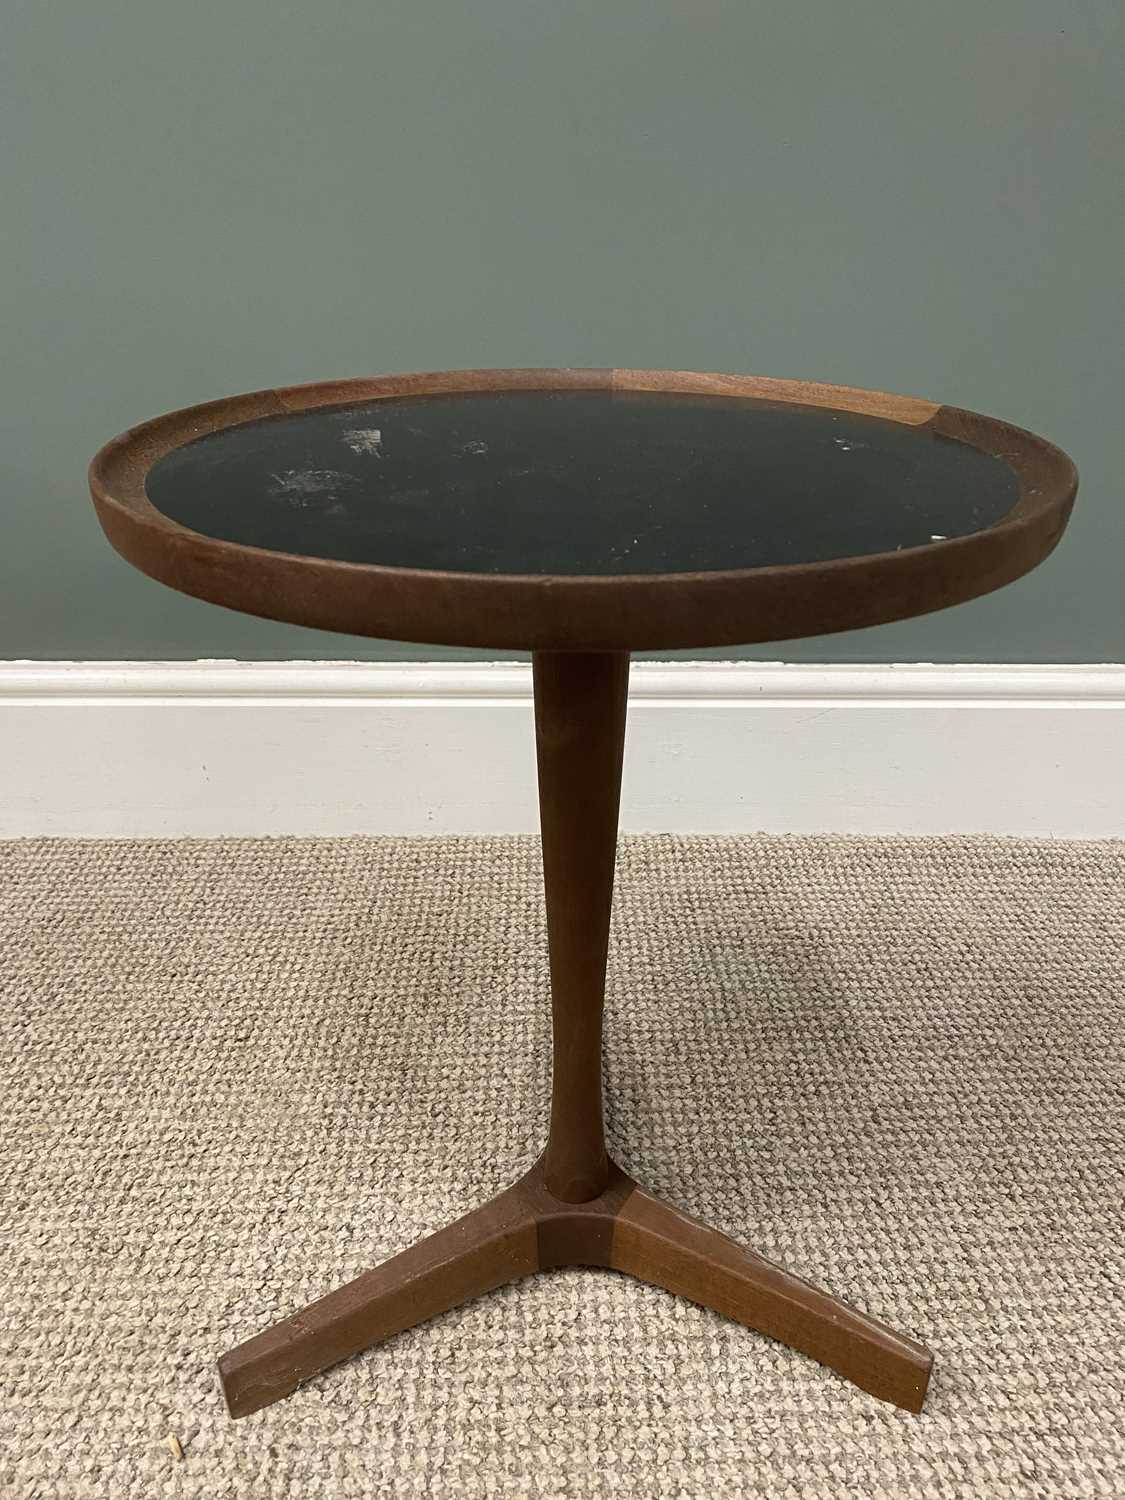 DANISH MID-CENTURY SIDE TABLE BY HANS C. ANDERSEN having a circular top on tripod base with turned